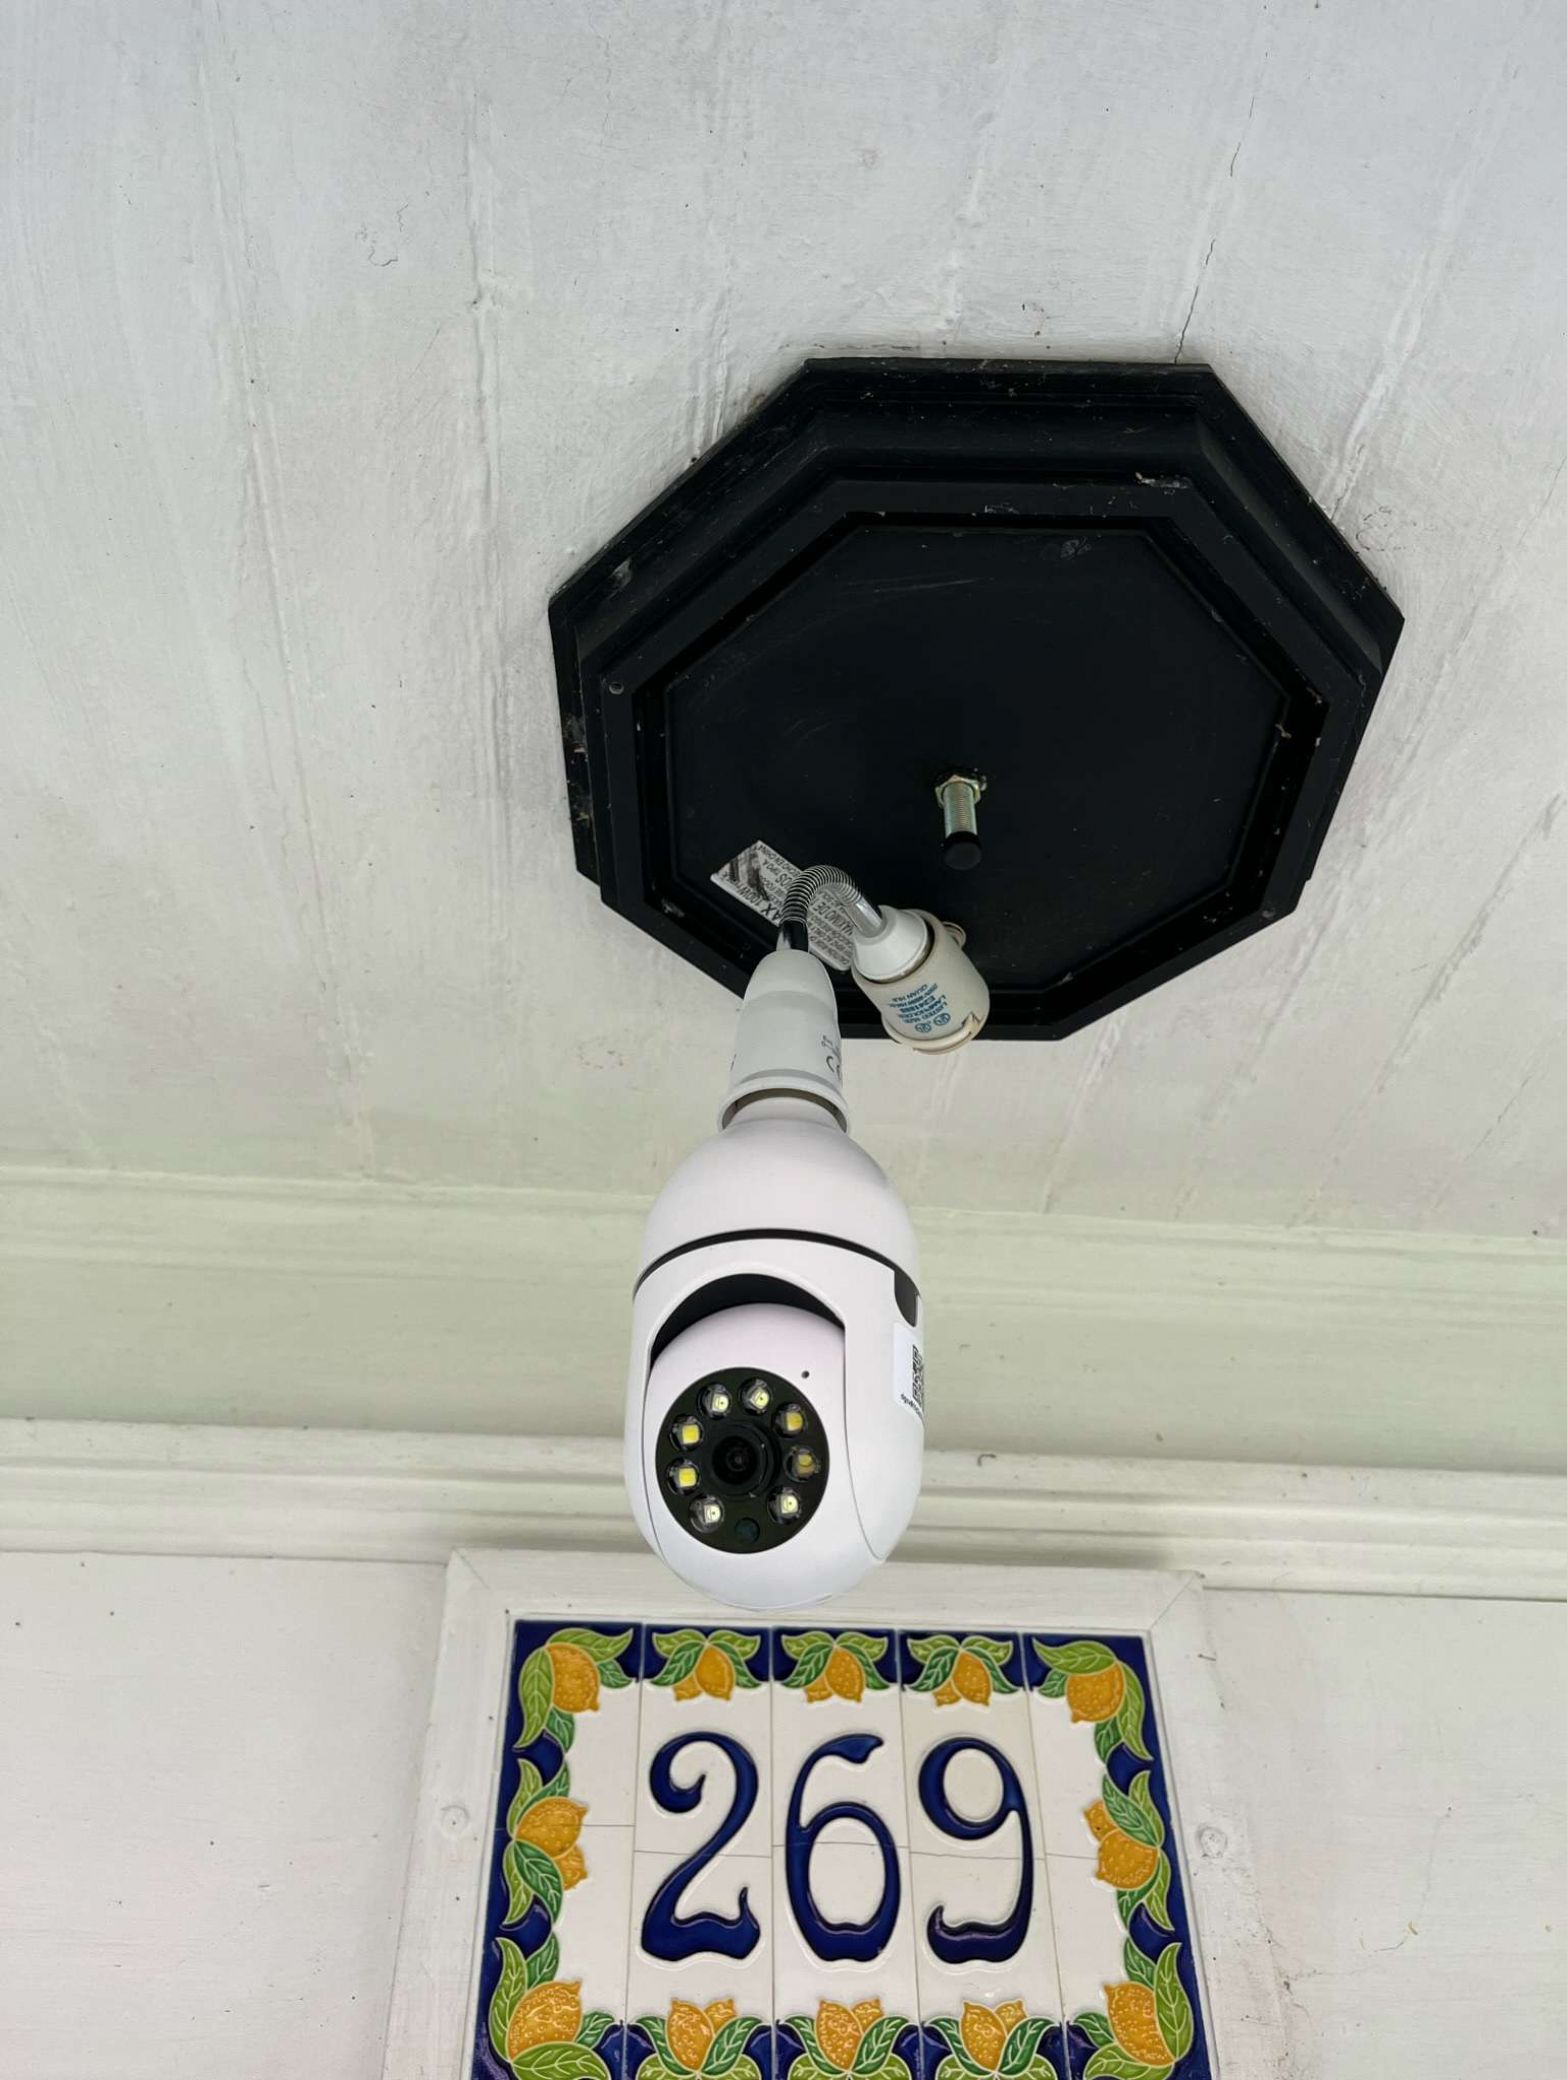 Nomad Security Camera Is It A Scam